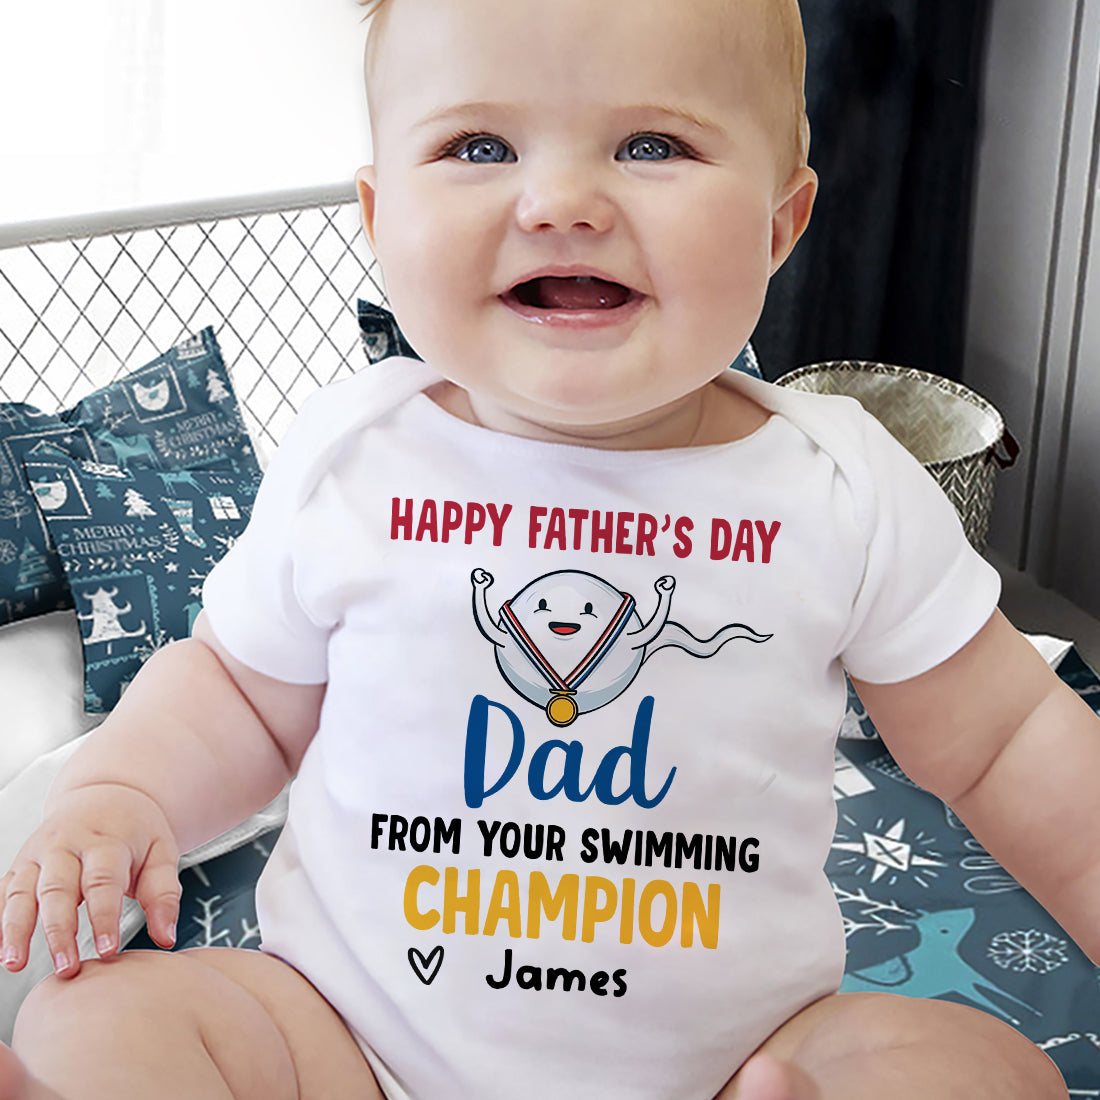 From Your Swimming Champion Baby Onesie Personalized Father's Day Gift